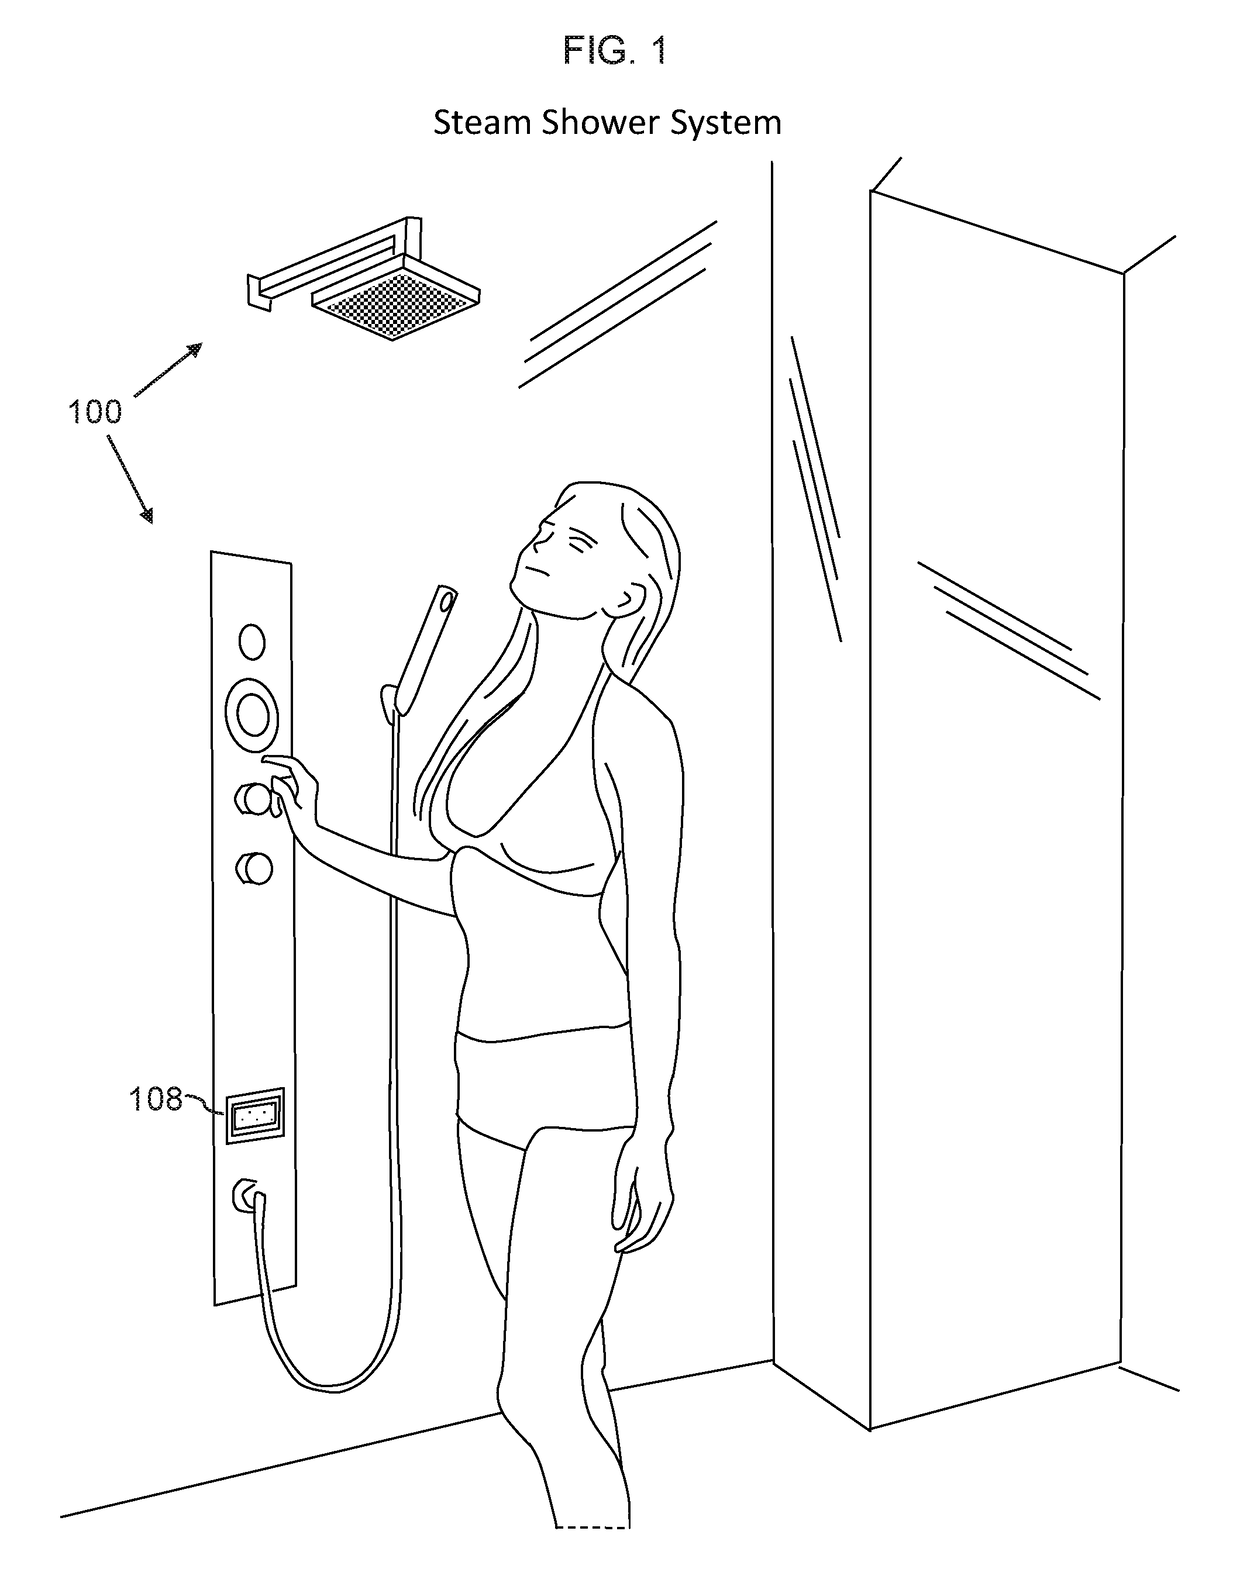 Steam shower system and device